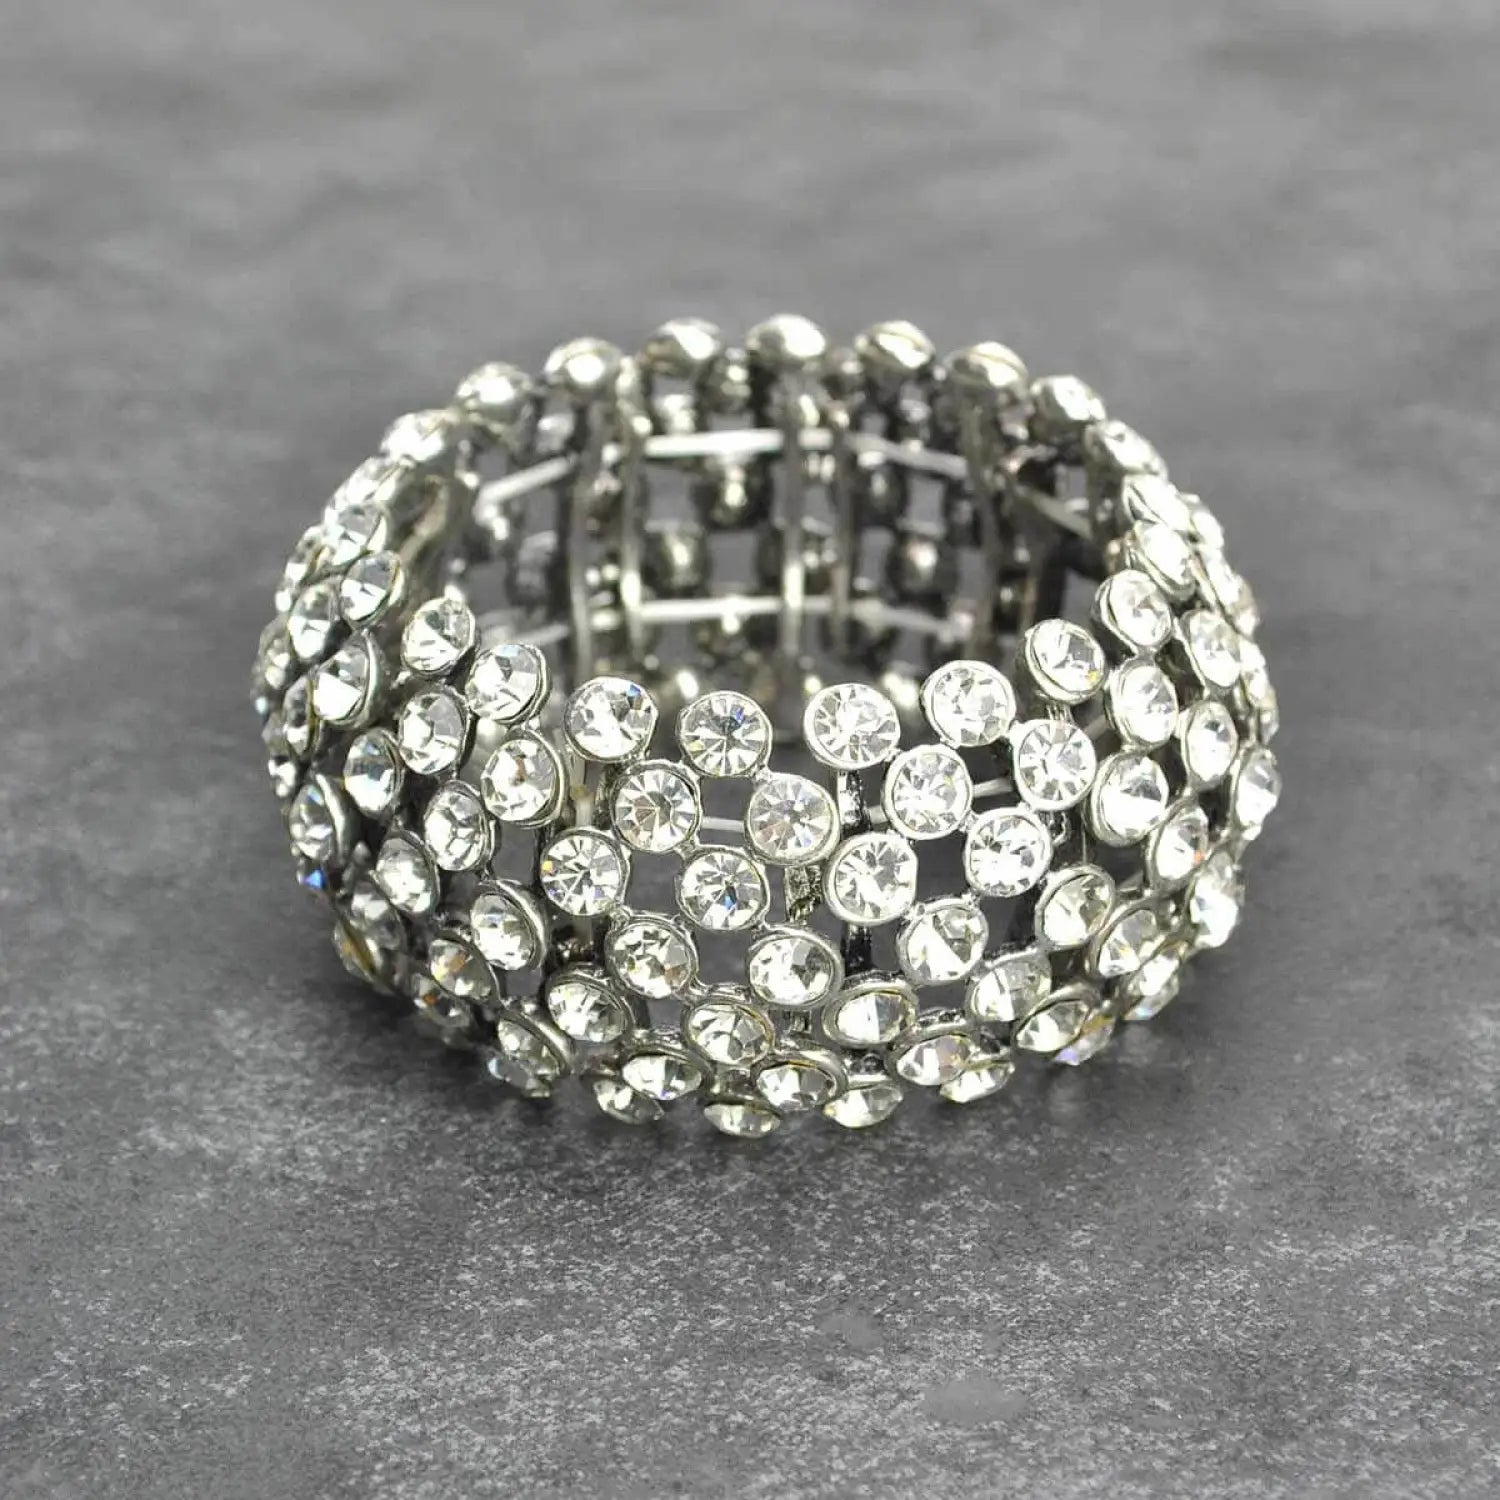 White gold and diamond ring displayed in Diamante Rhinestone Crystal Elasticated Cuff Bracelet